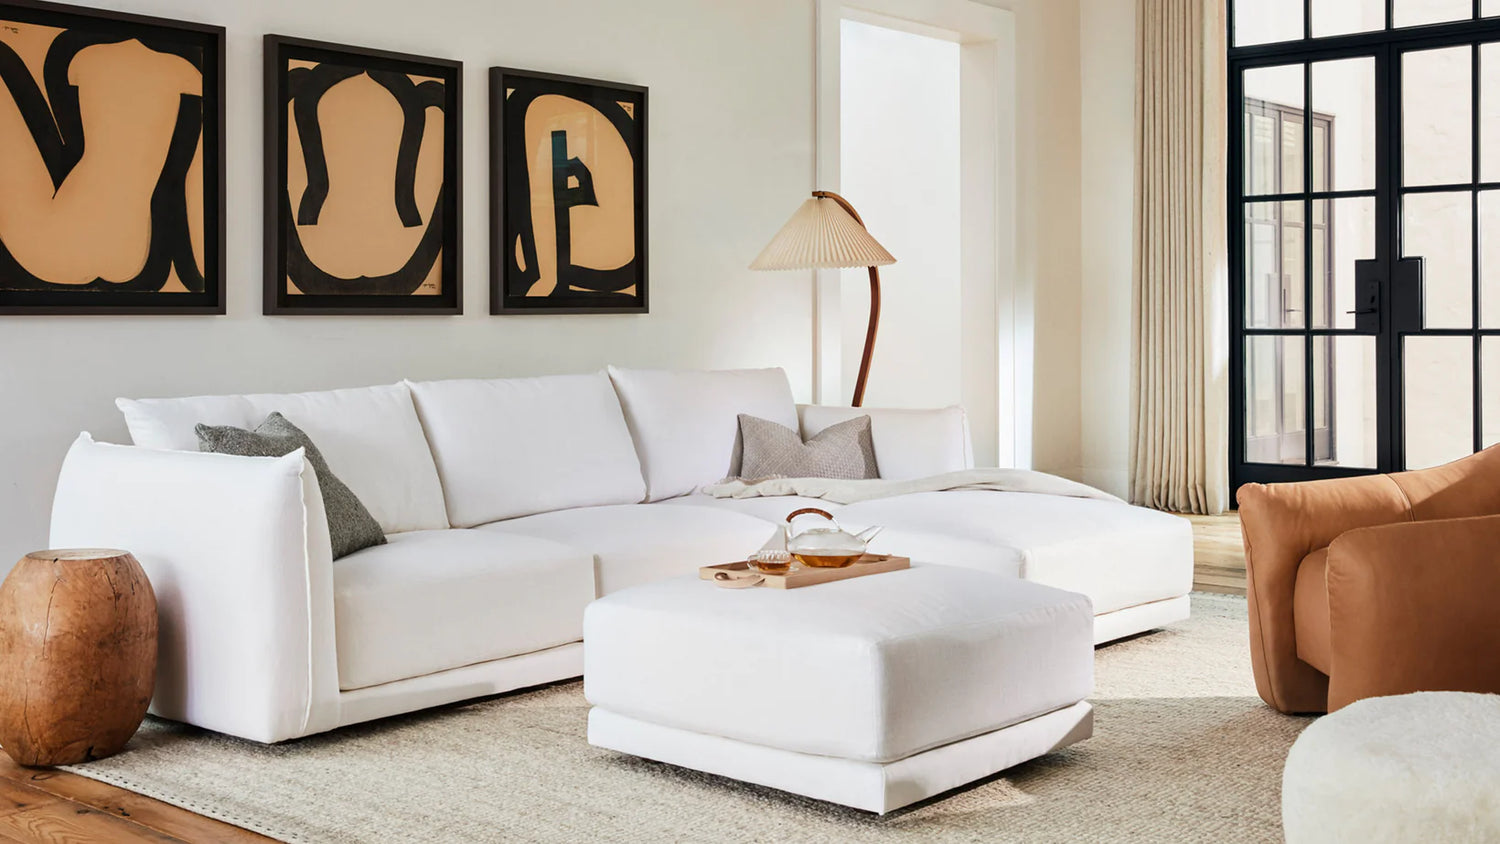 A modern living room with a white sectional sofa, white ottoman, and a wooden side table. Three abstract art pieces hang on the wall behind the sofa. A standing lamp with a beige shade is placed next to the sofa. Large windows allow natural light to fill the space.